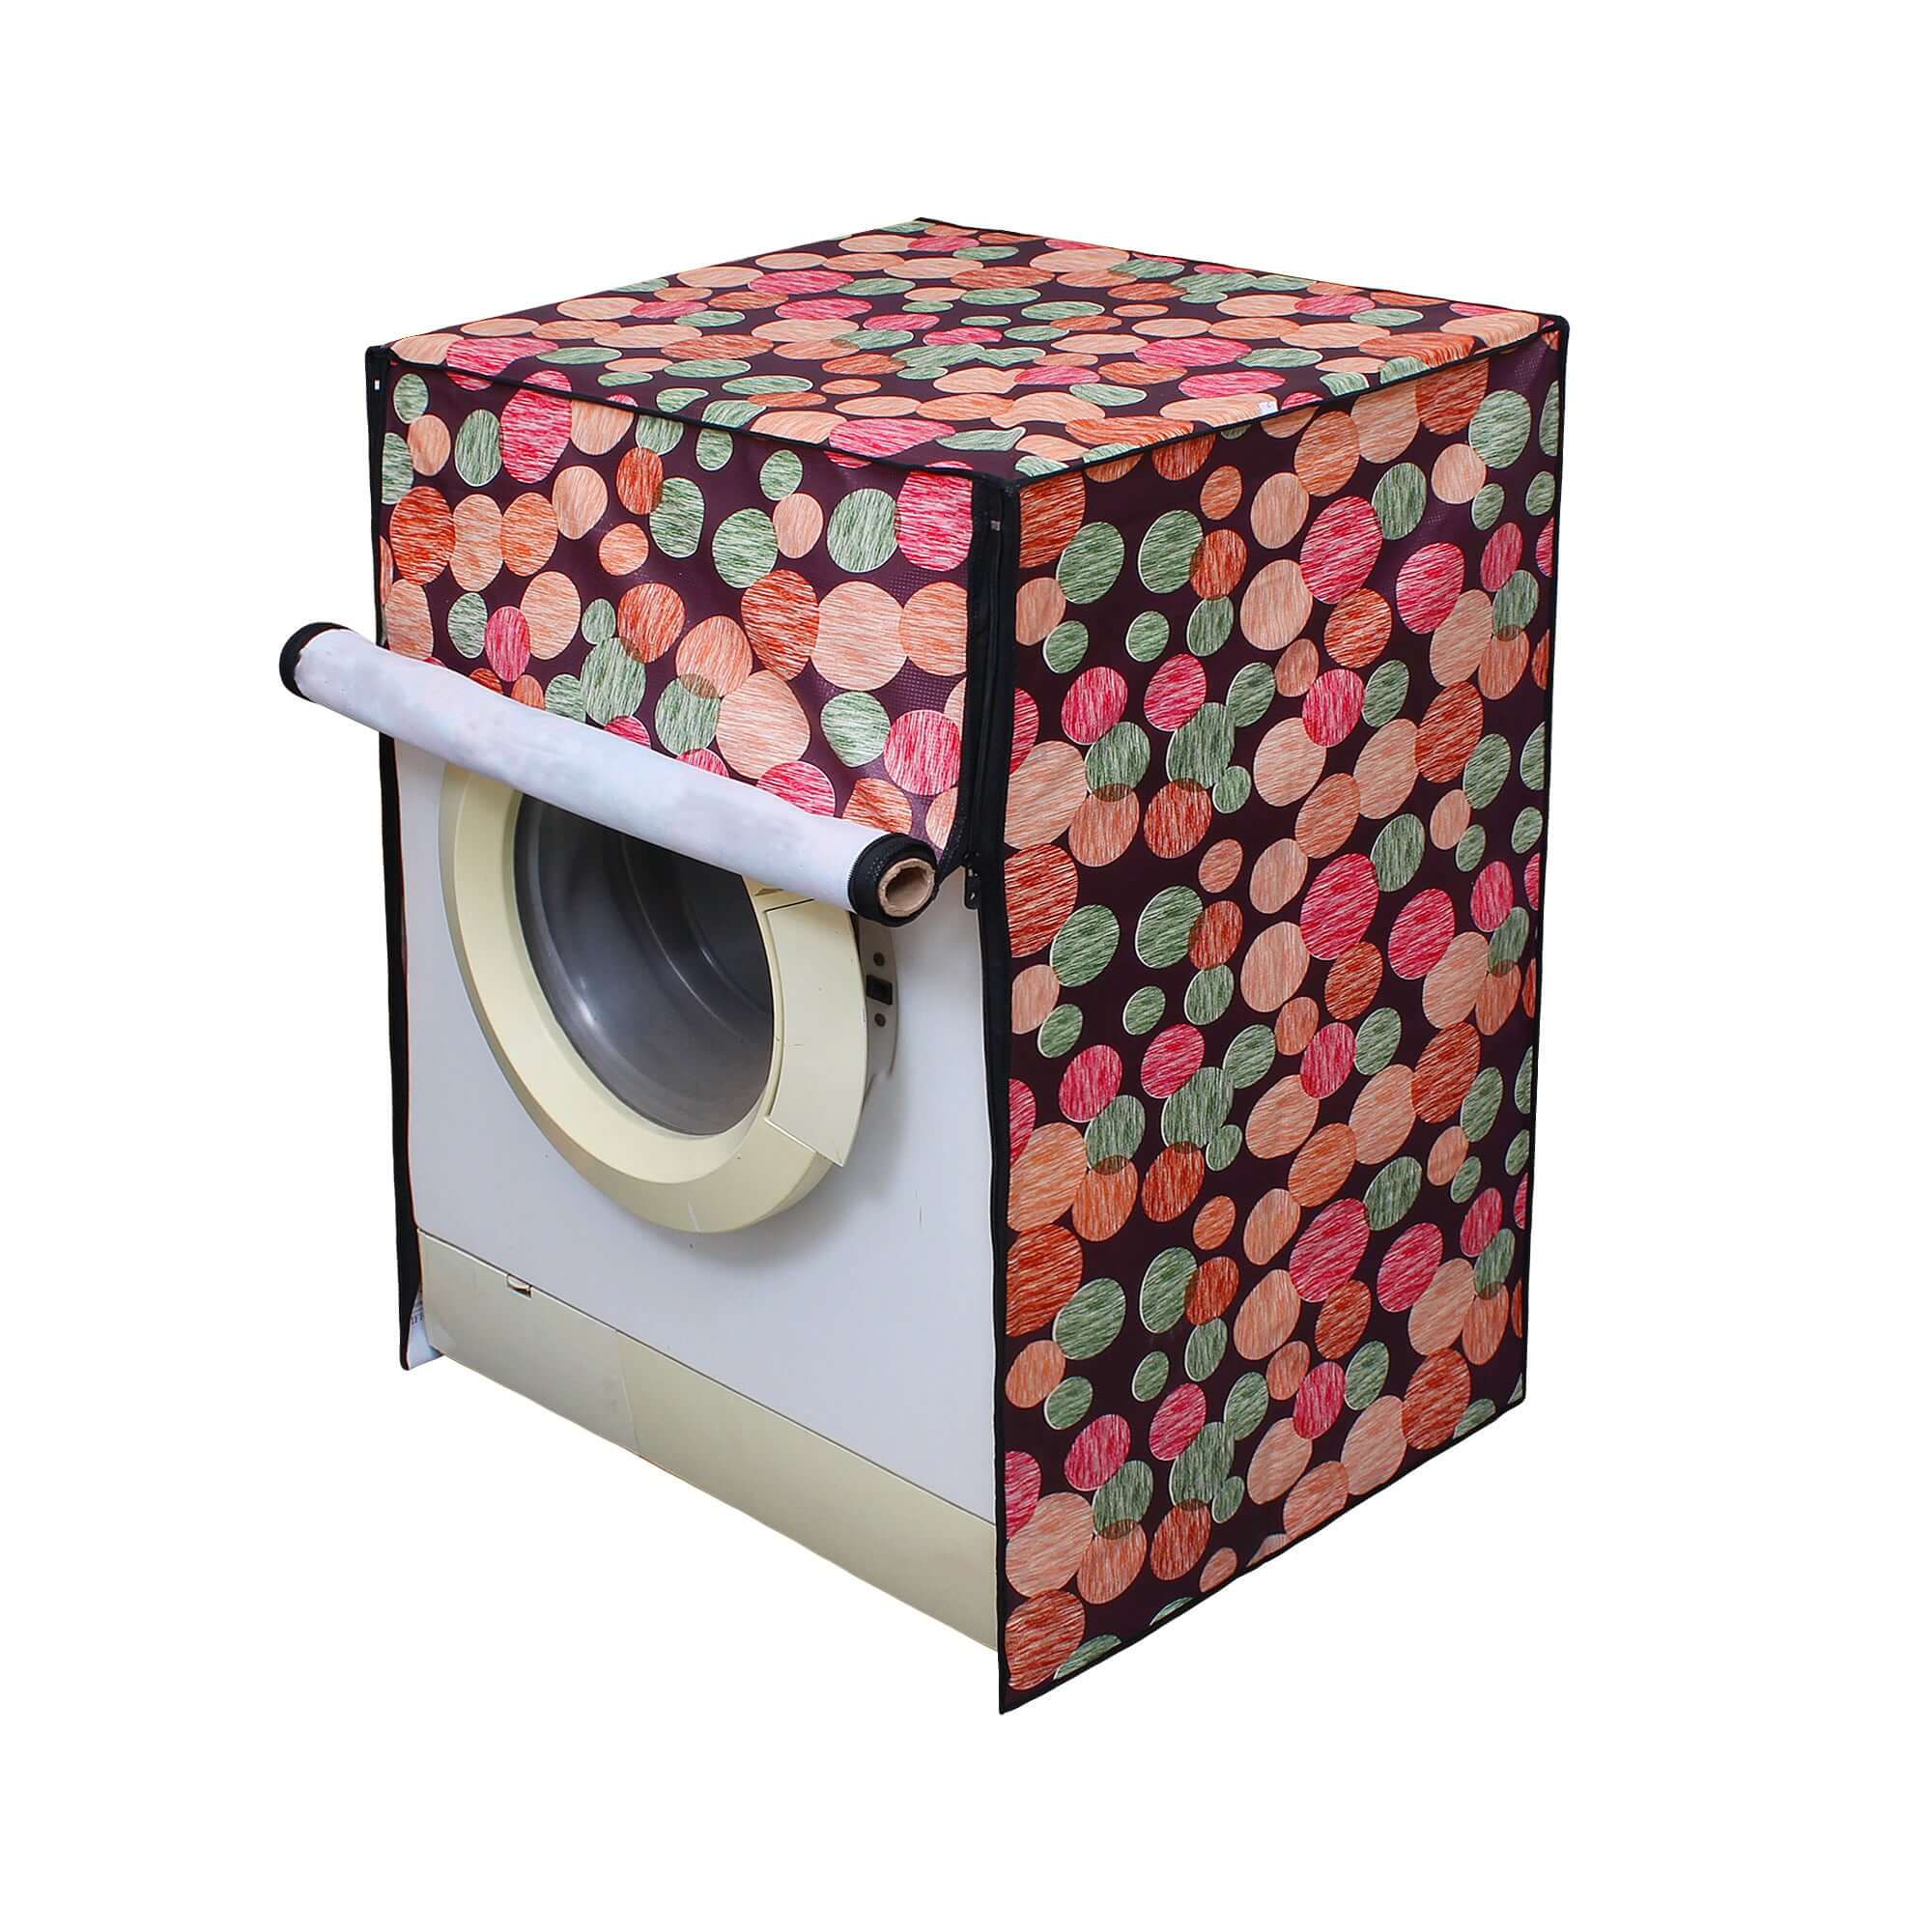 Fully Automatic Front Load Washing Machine Cover, SA66 - Dream Care Furnishings Private Limited